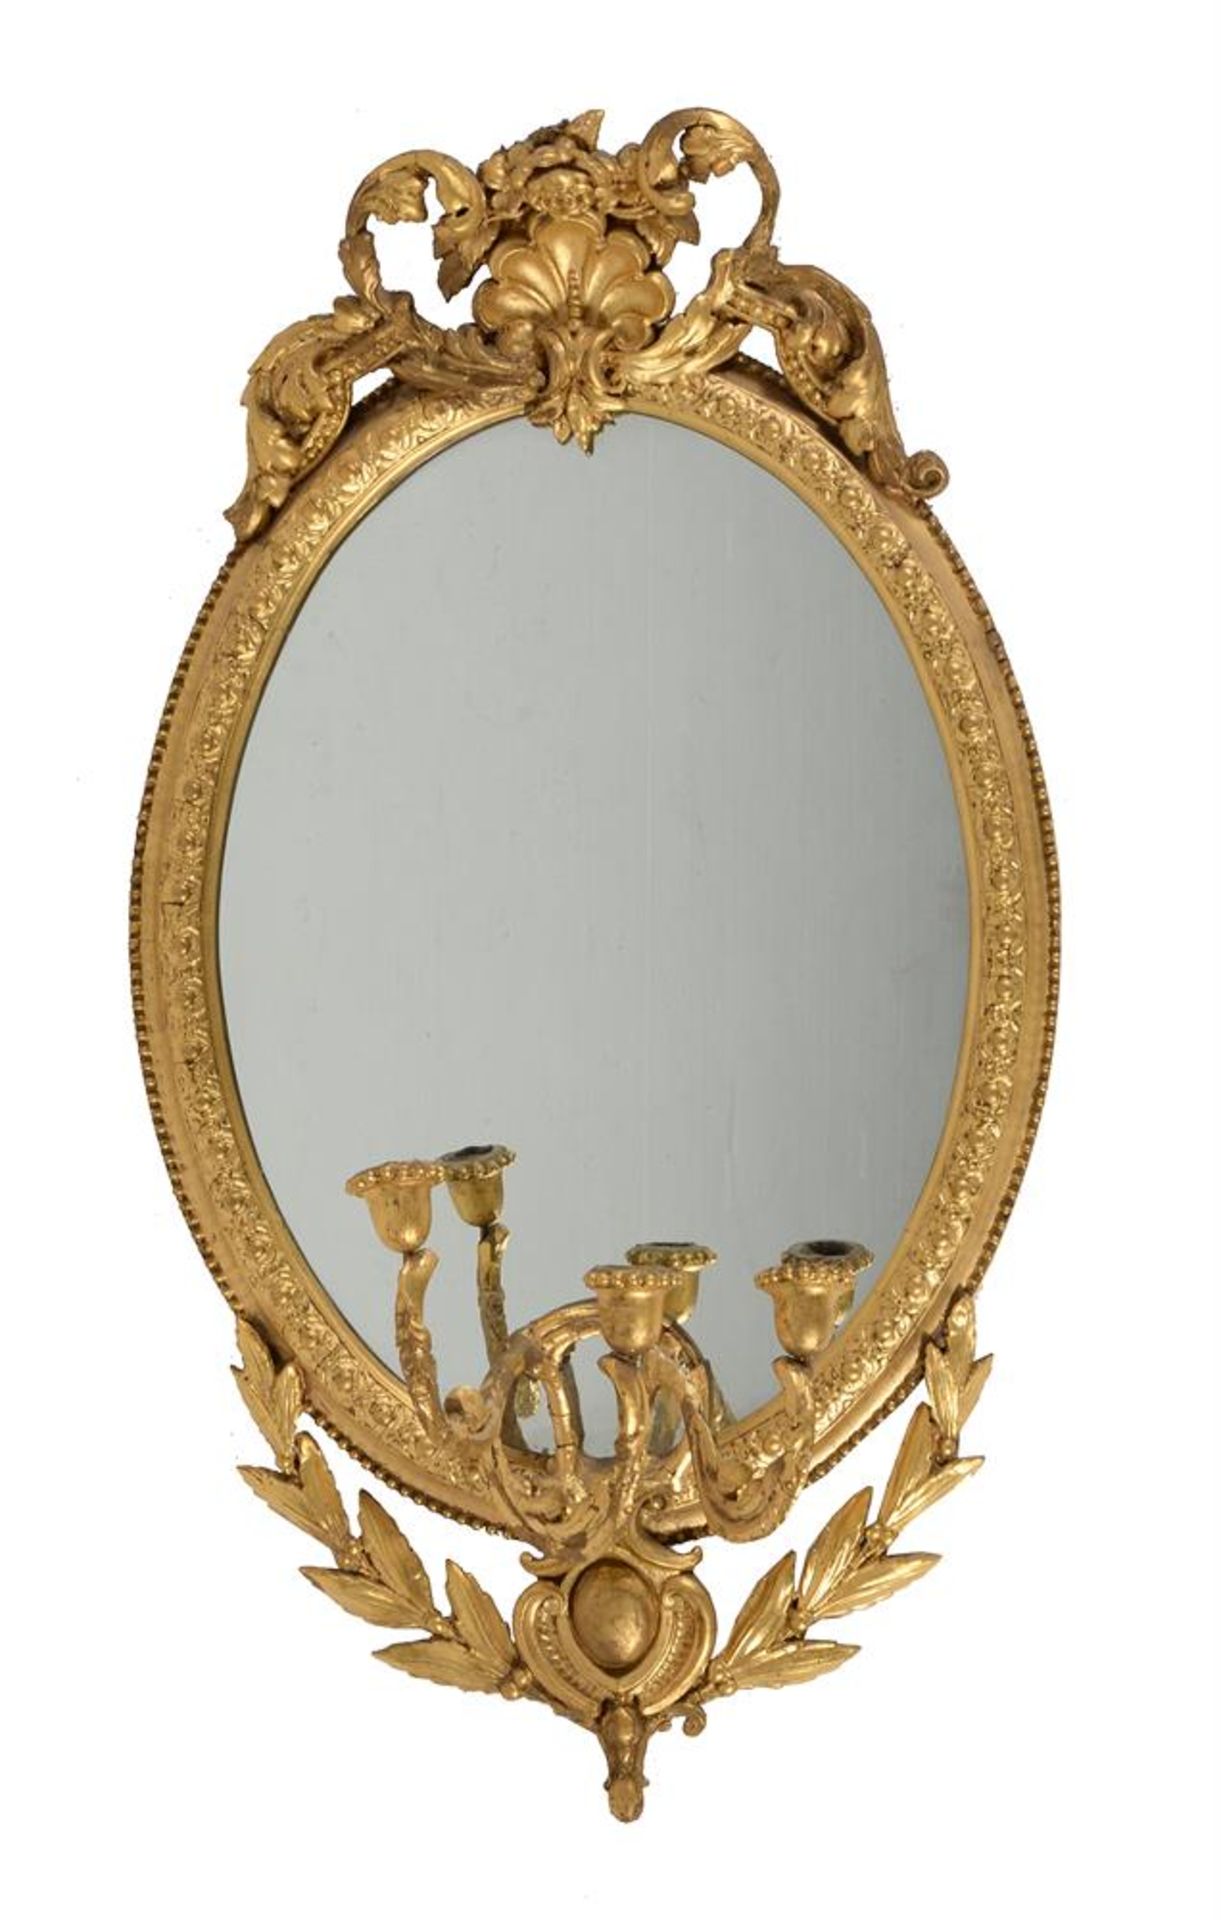 A pair of Victorian giltwood and composition girandole oval wall mirrors with three candle branches